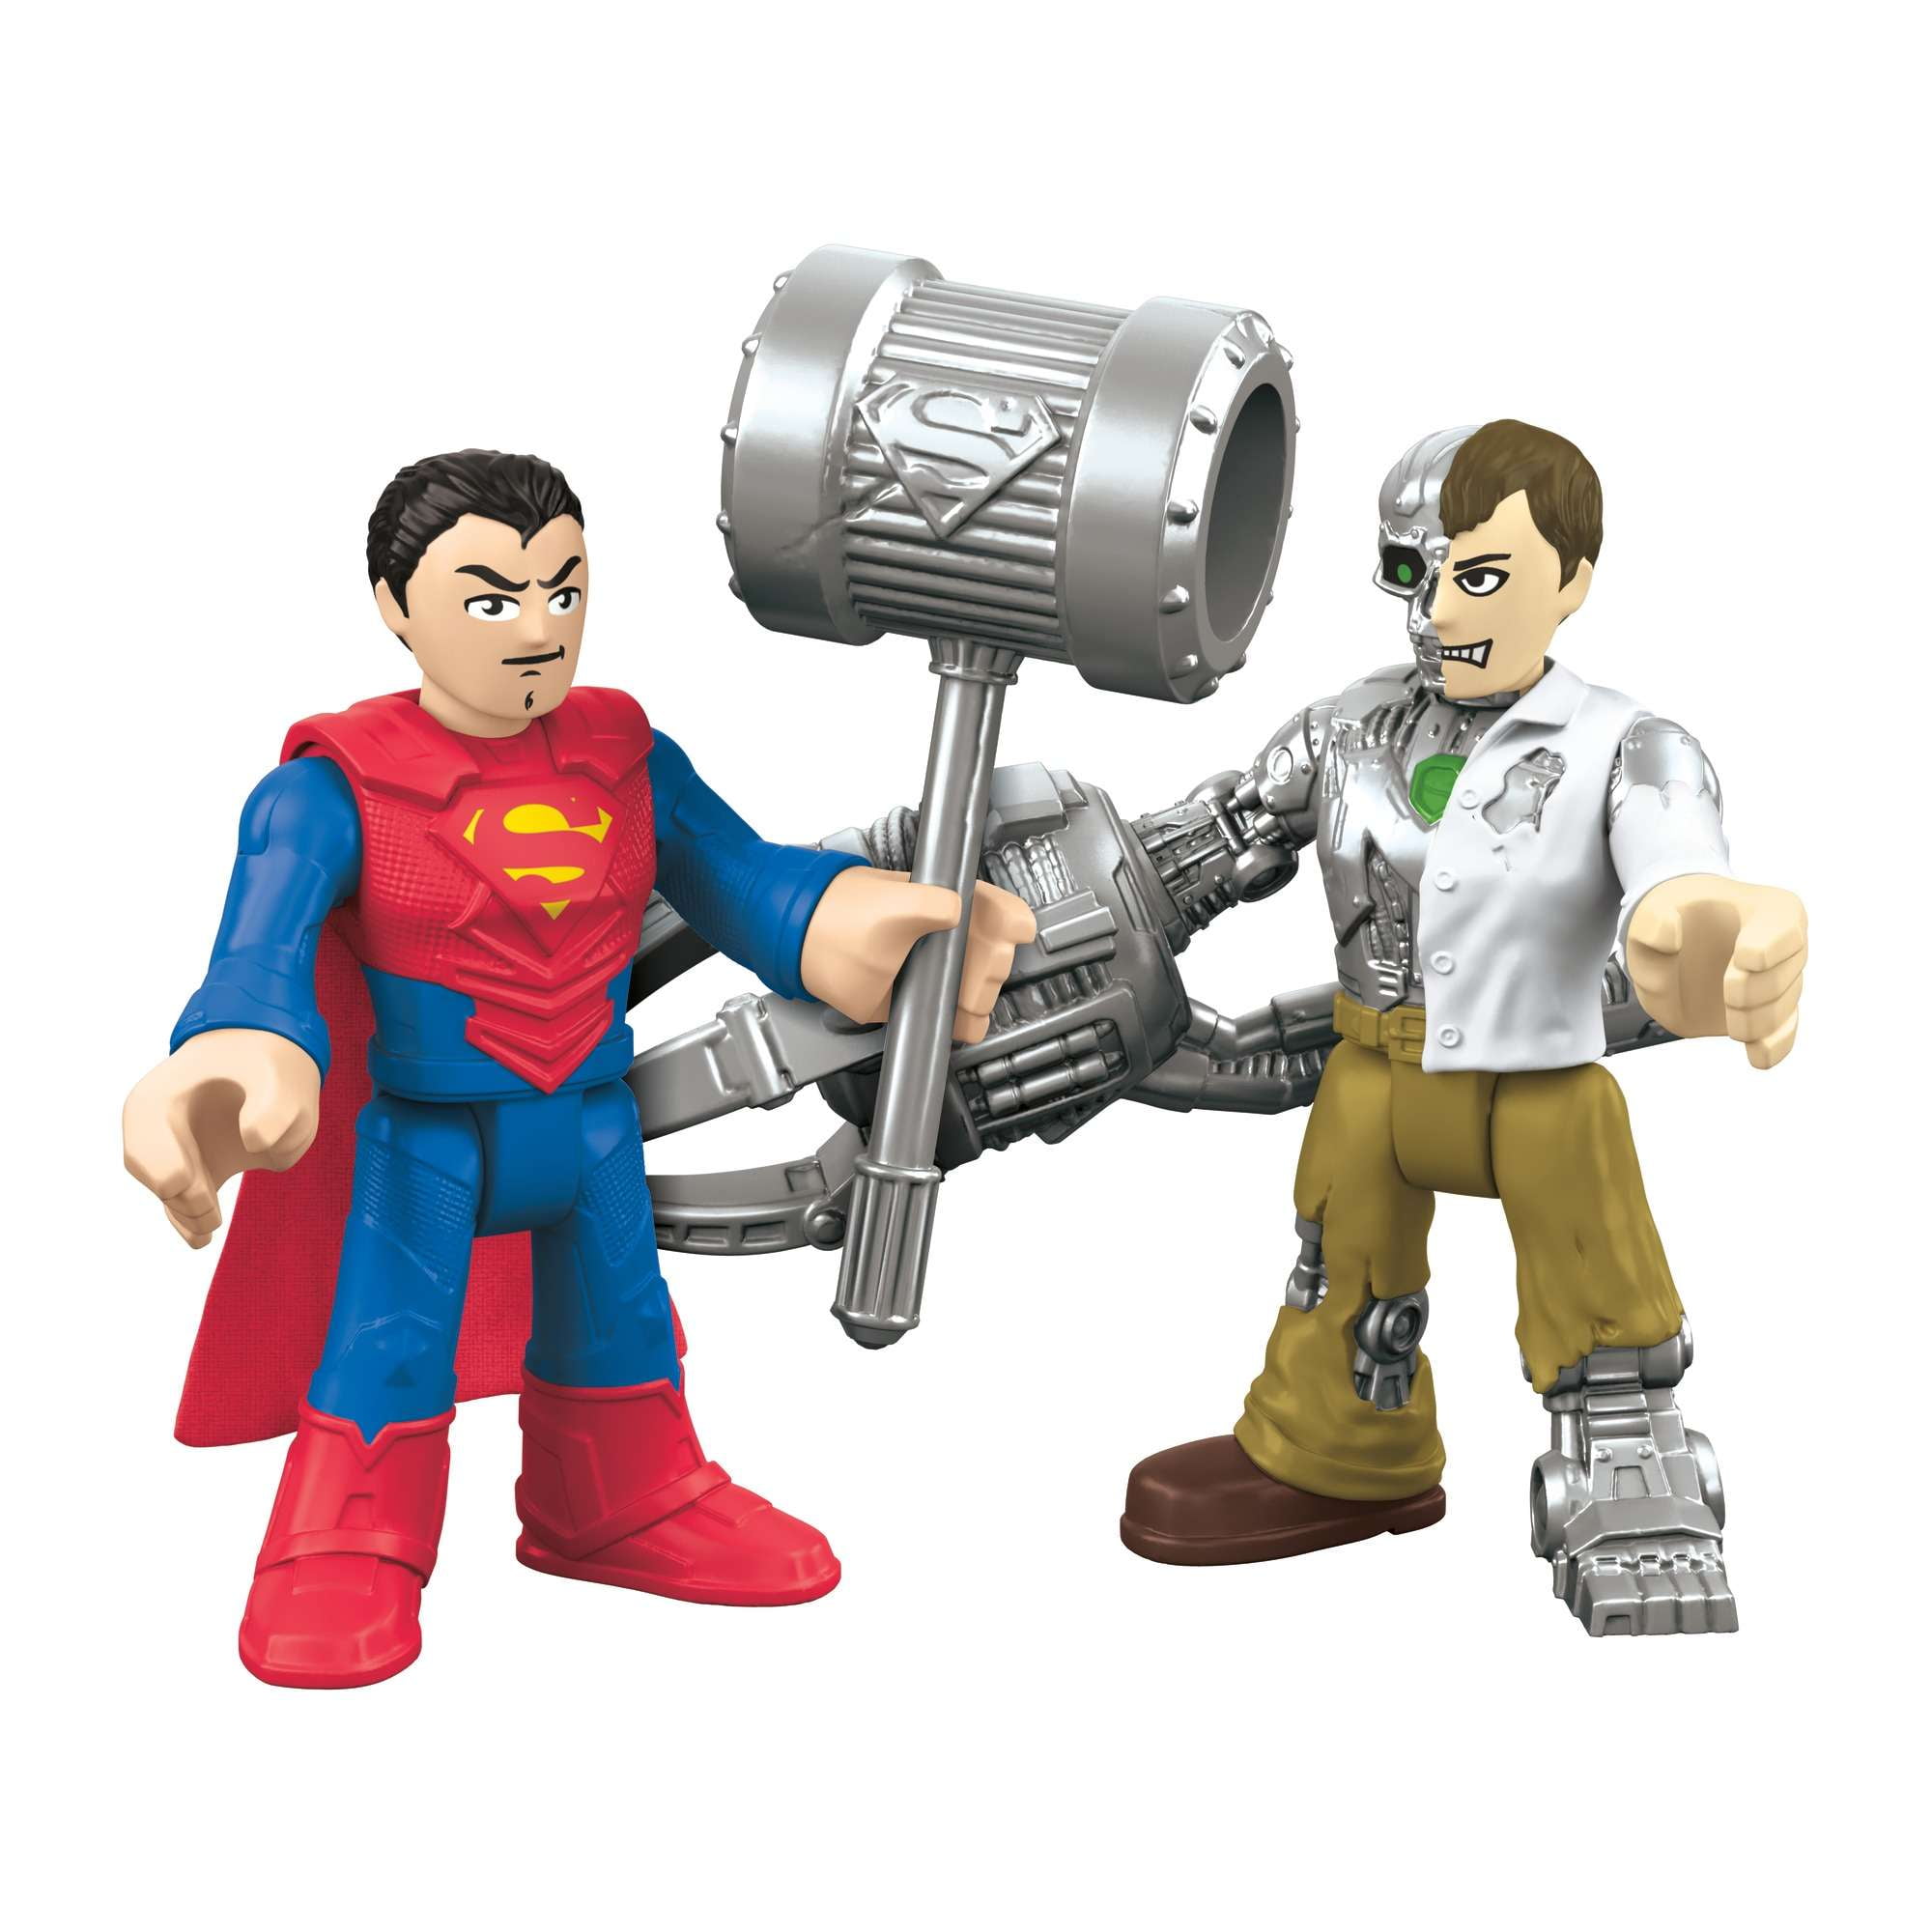 Fisher-Price Imaginext DC Super Friends Pack 